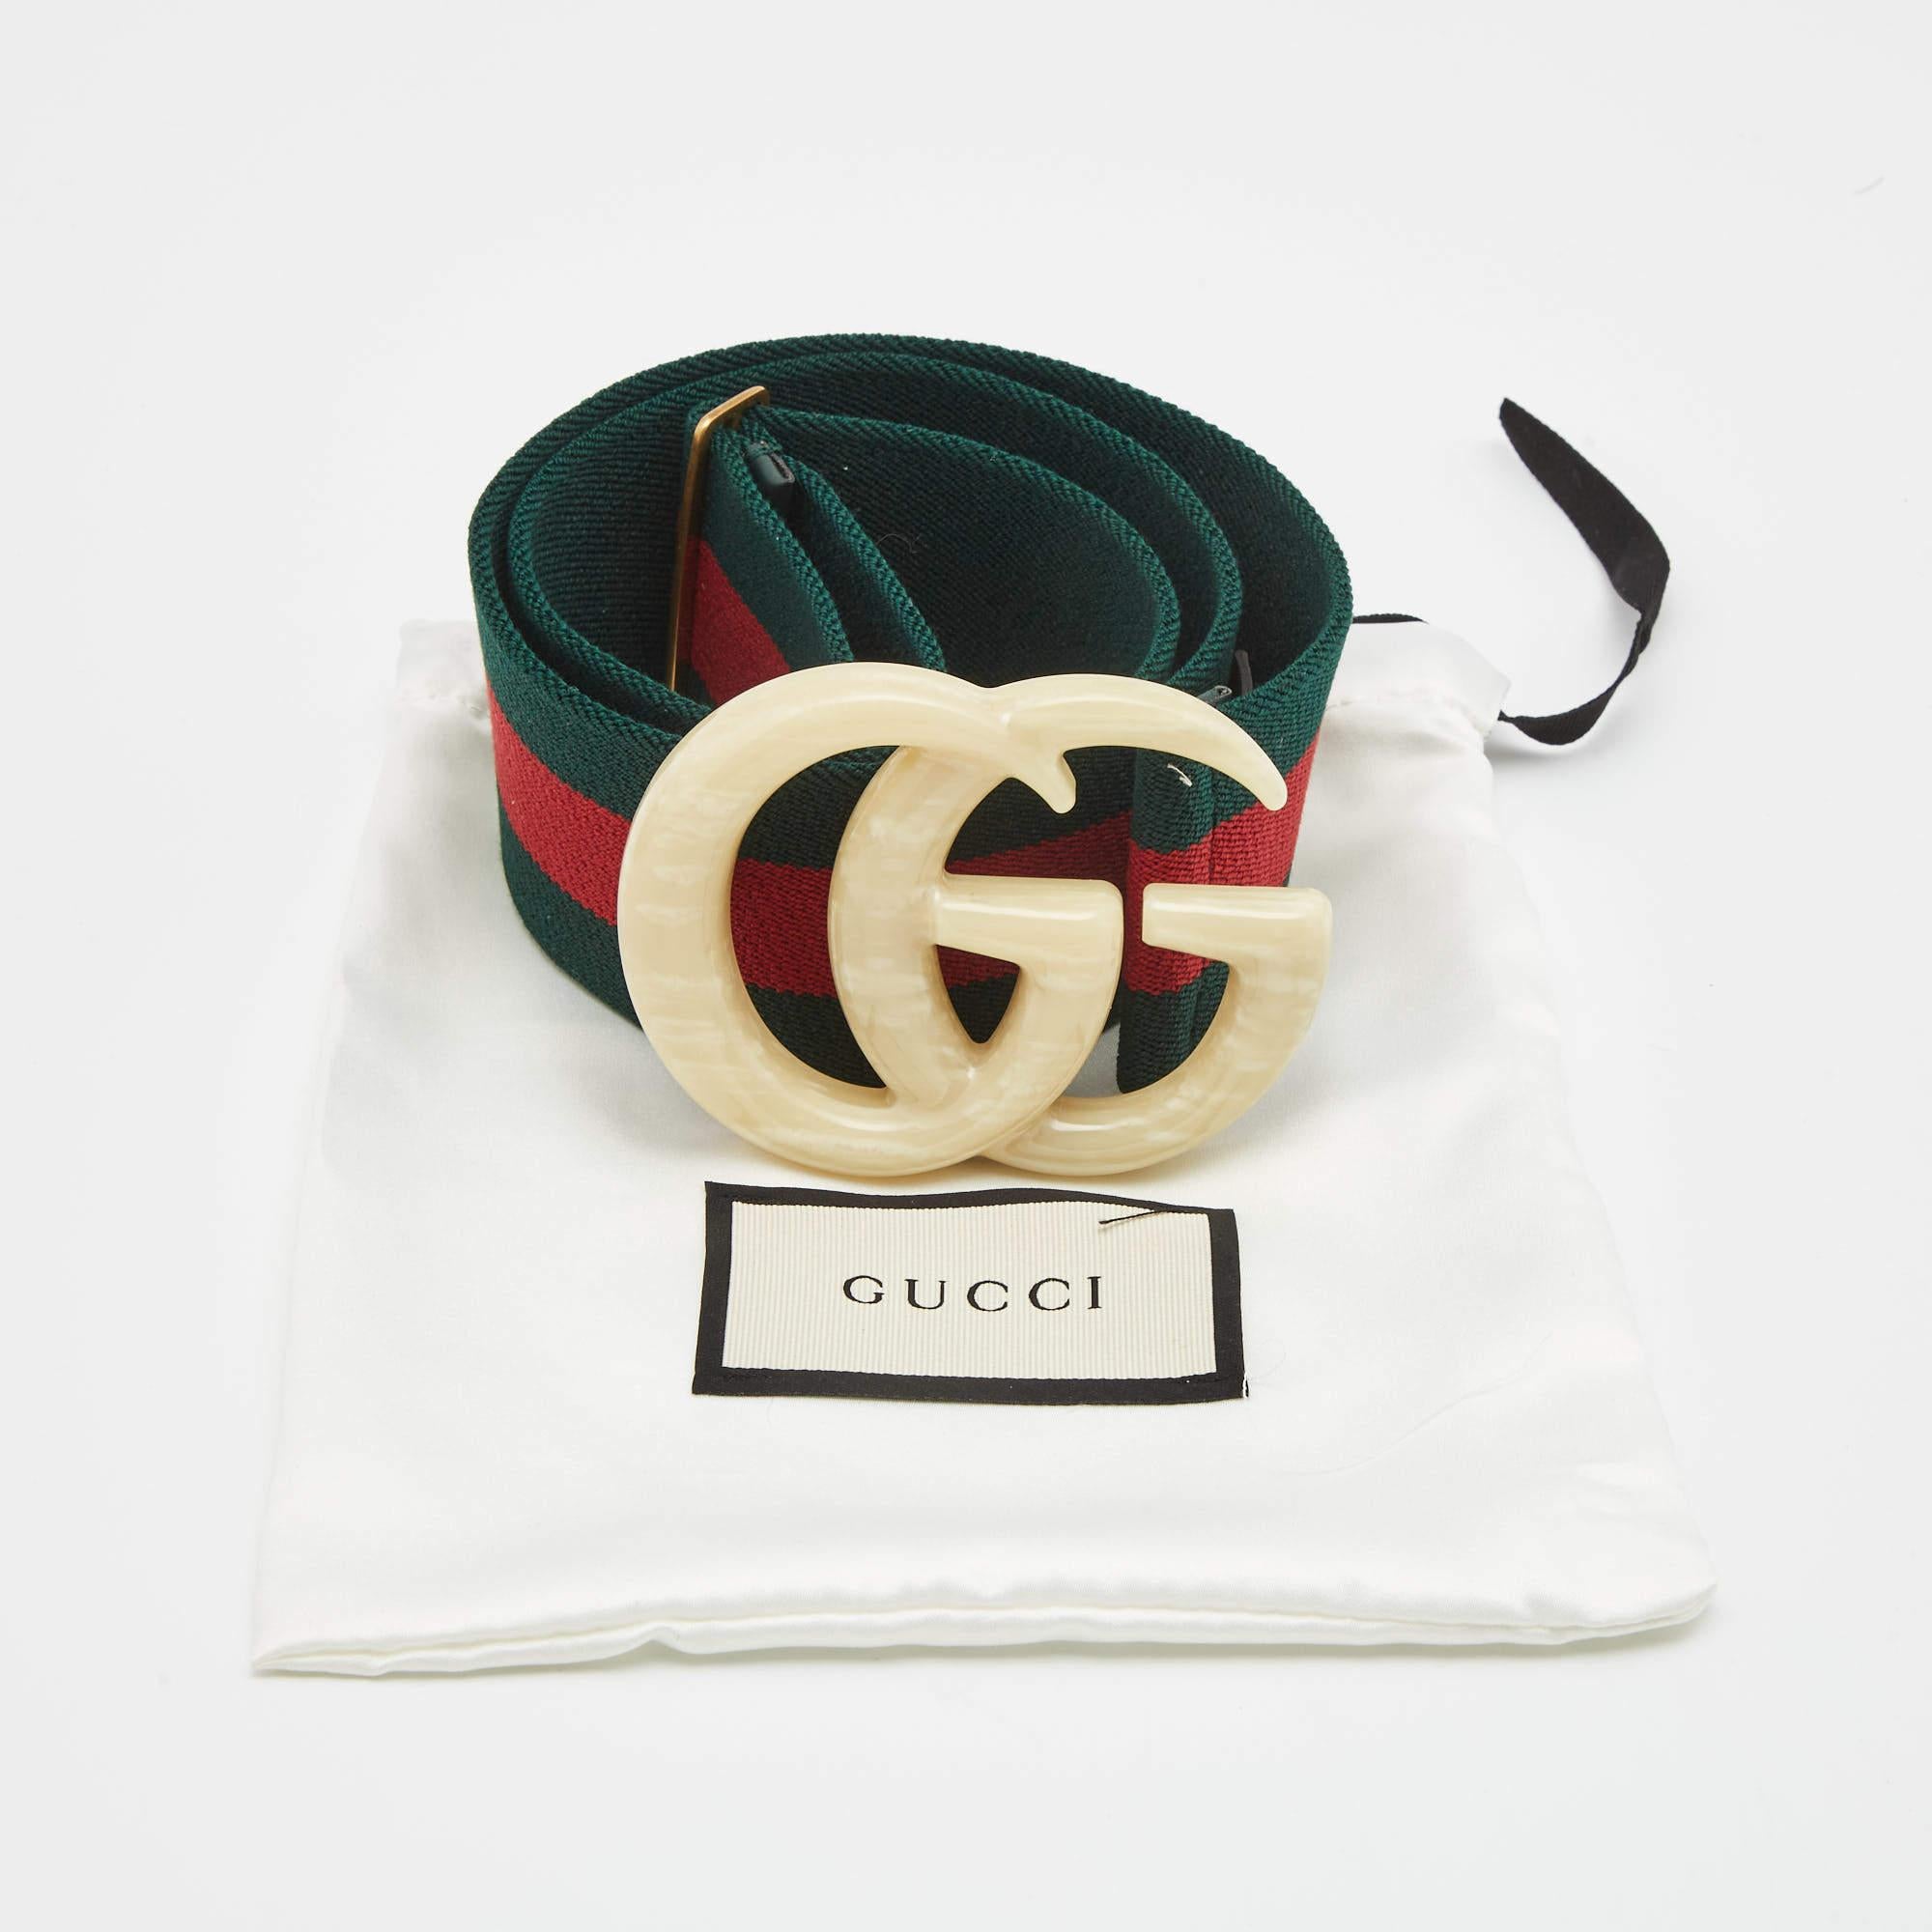 Belts are amazing accessories offering both functionality and style. If you're looking to add one, we have this fine choice by Gucci. It has a luxe look and a beautiful finish.

Includes: Original Dustbag

